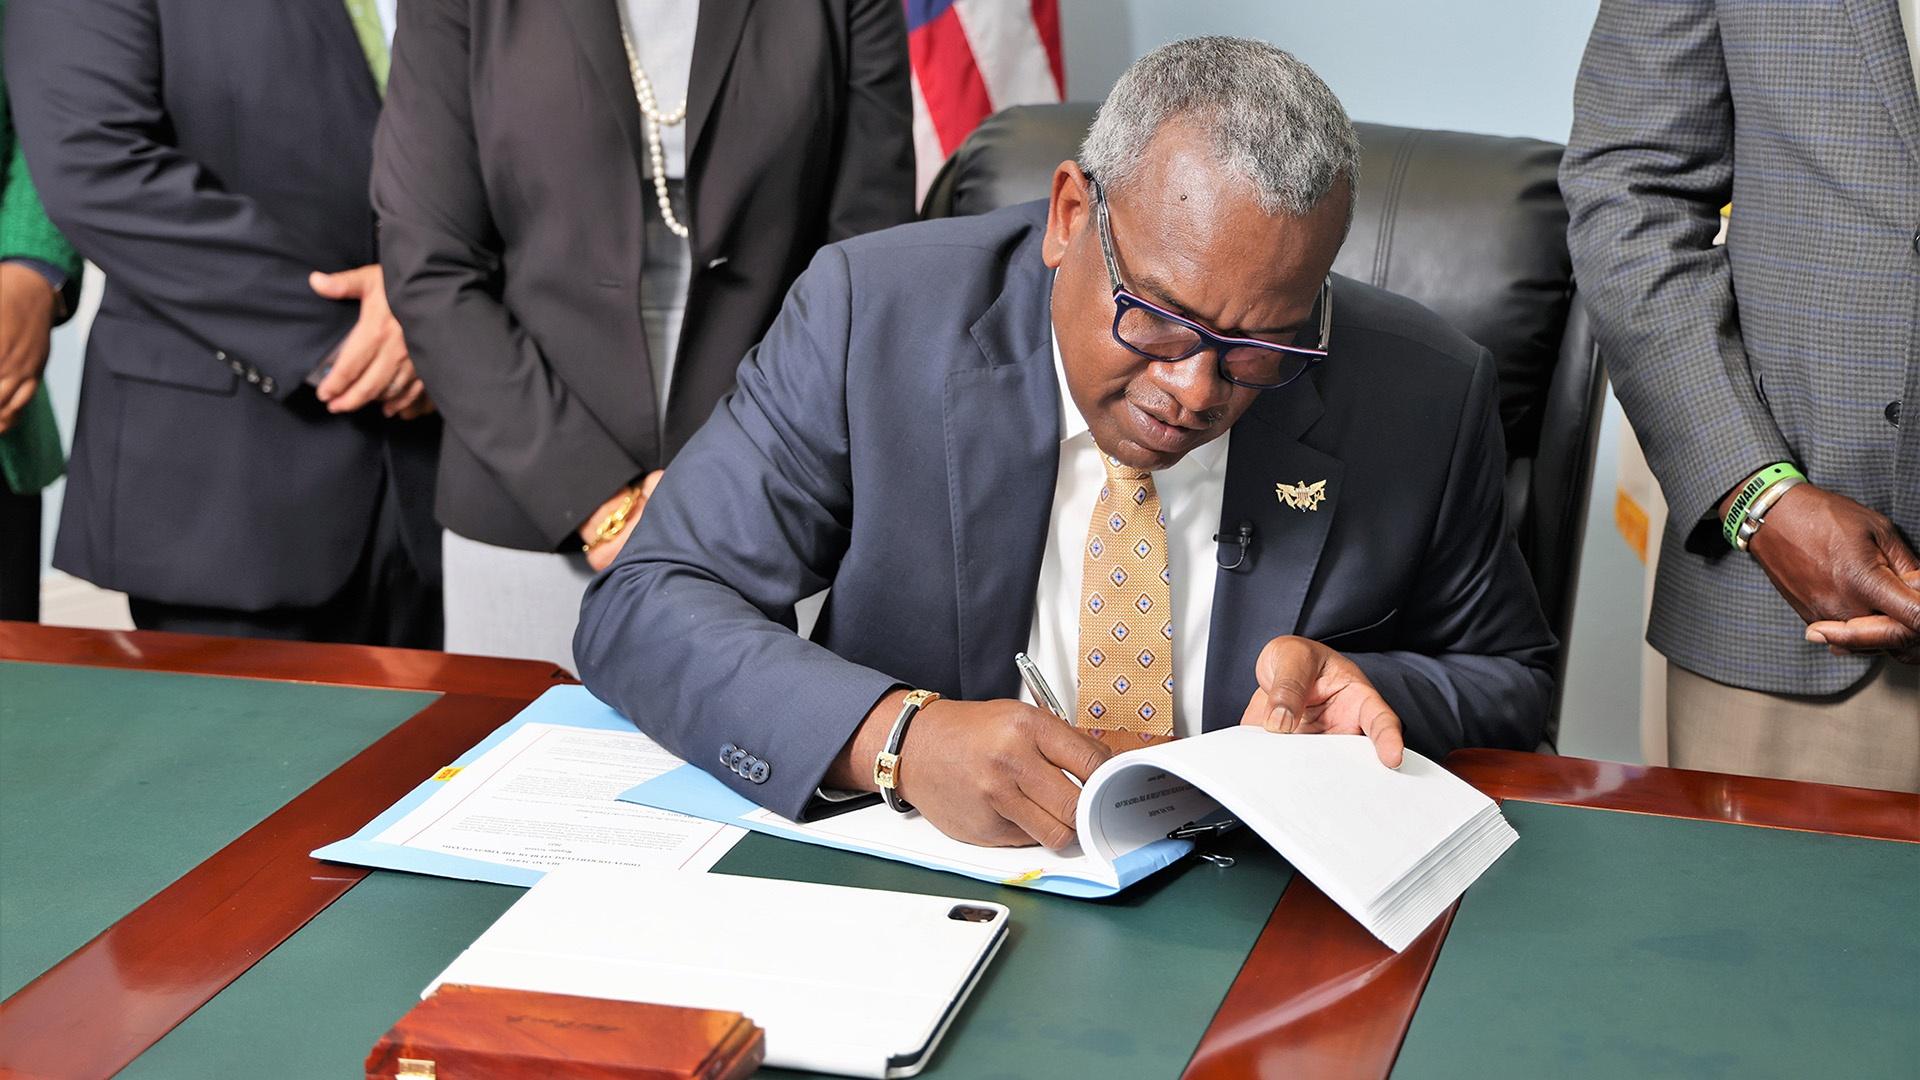 Governor Albert Bryan Jr. signed into law the Virgin Islands Cannabis Use Act